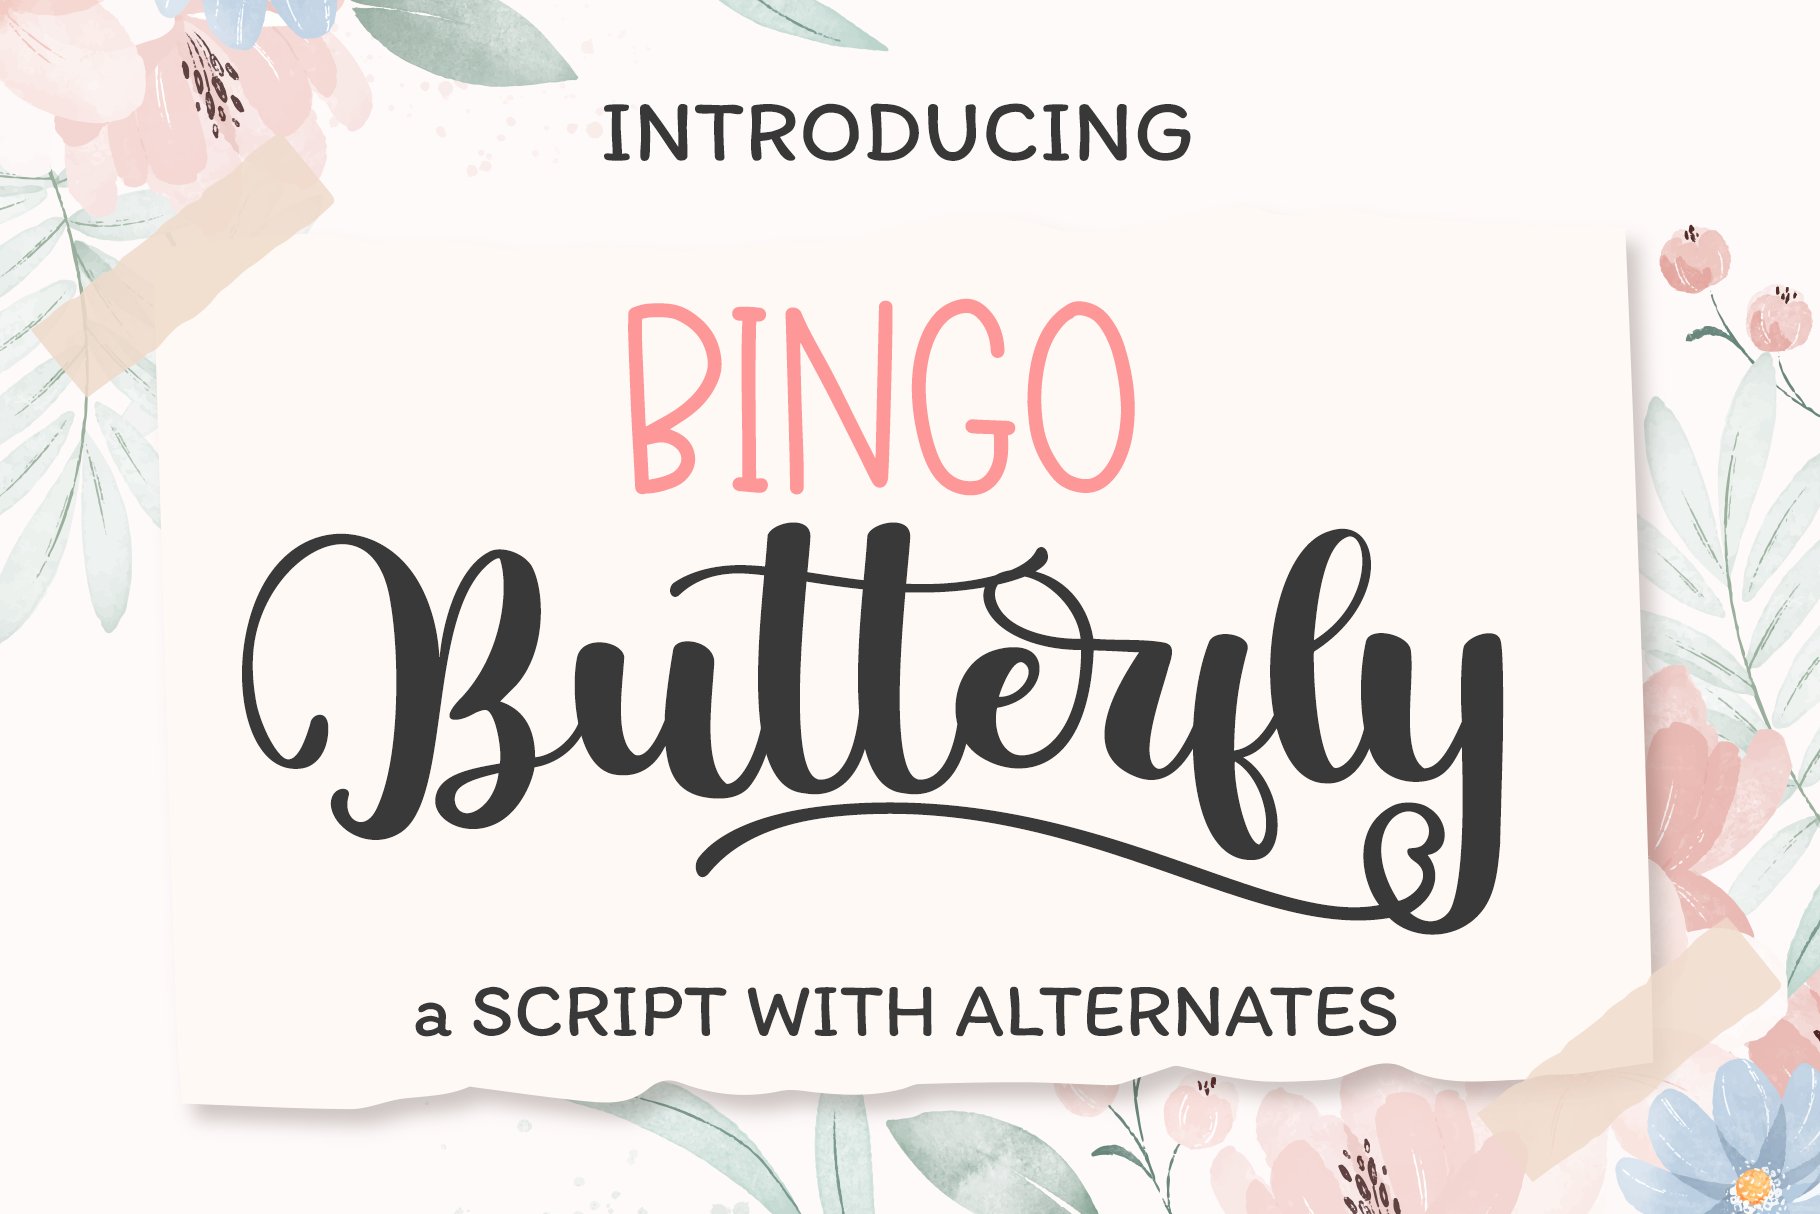 Bingo Butterfly cover image.